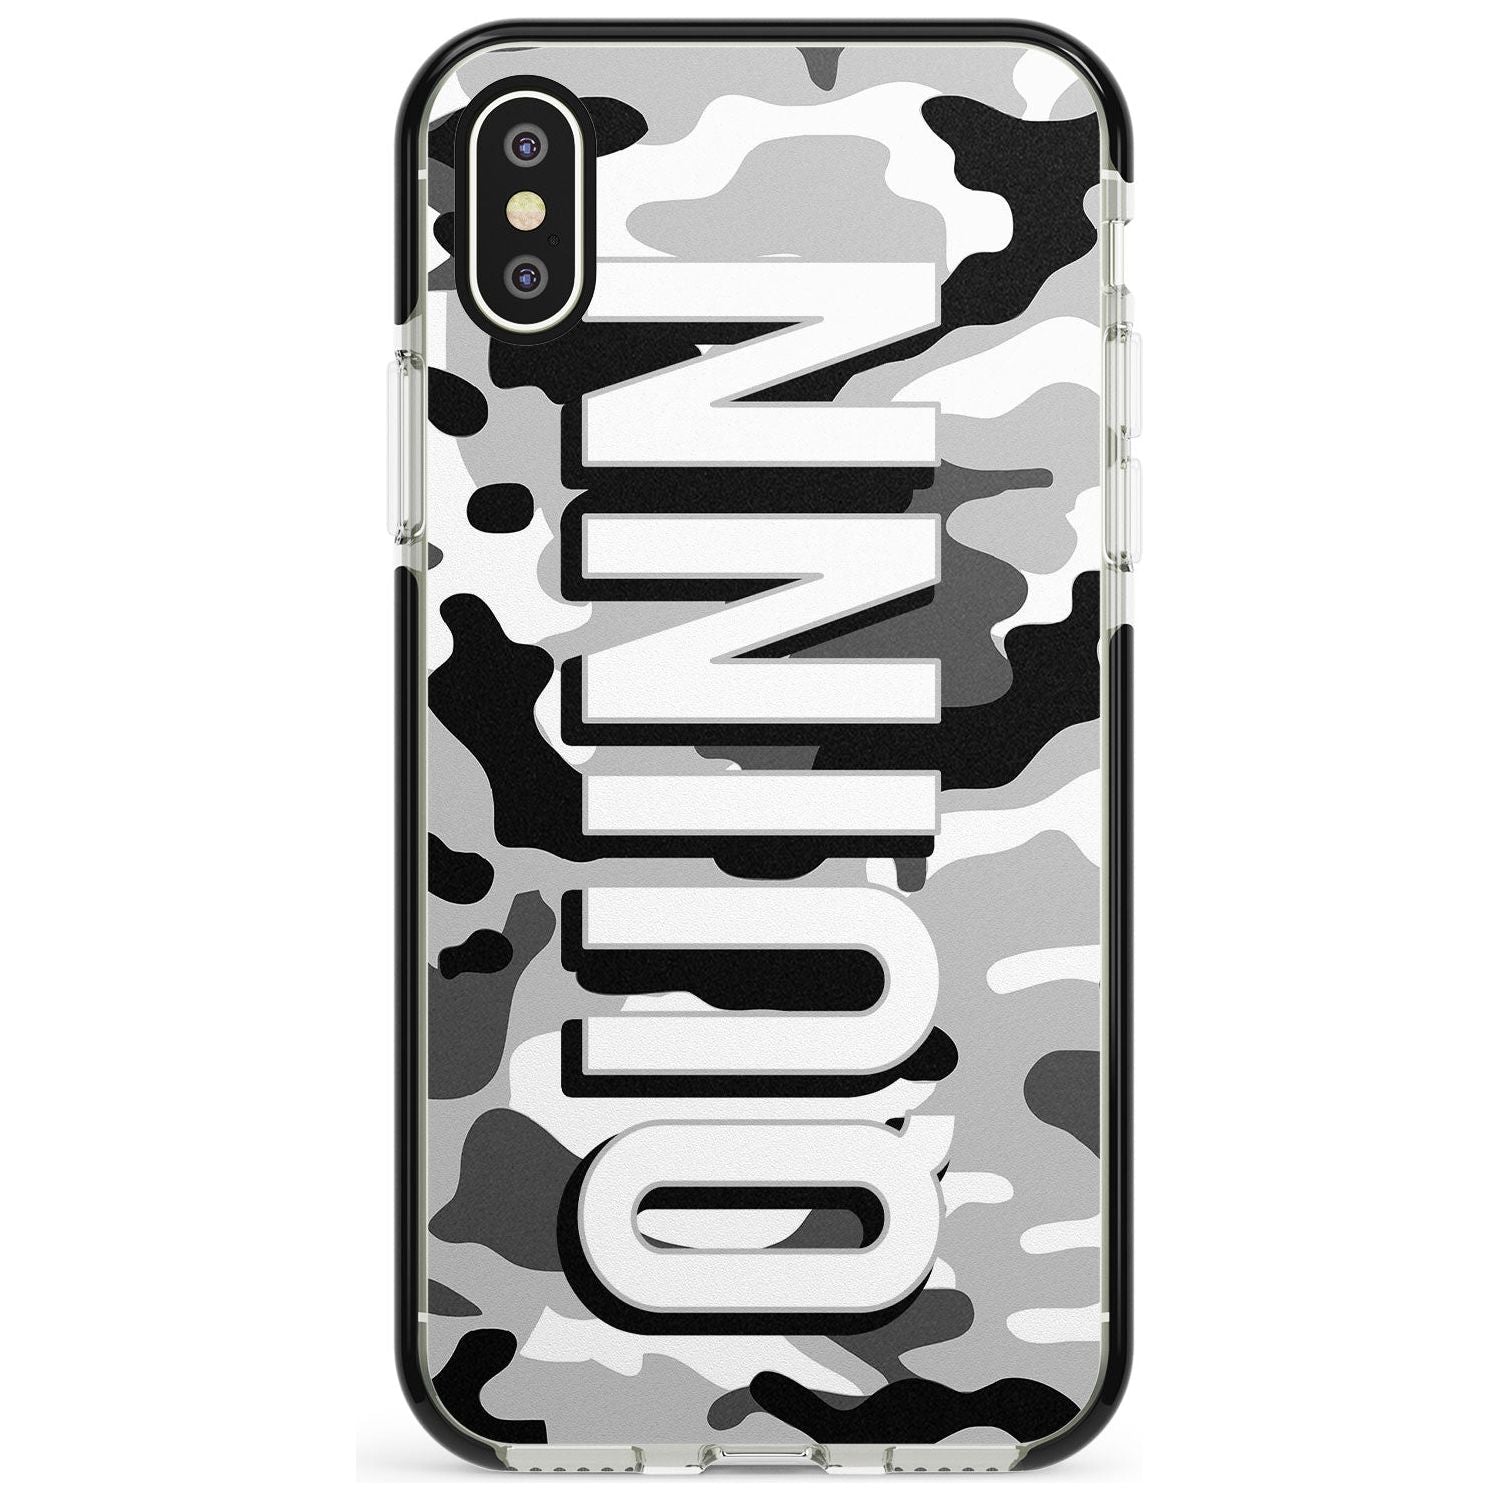 Greyscale Camo Pink Fade Impact Phone Case for iPhone X XS Max XR